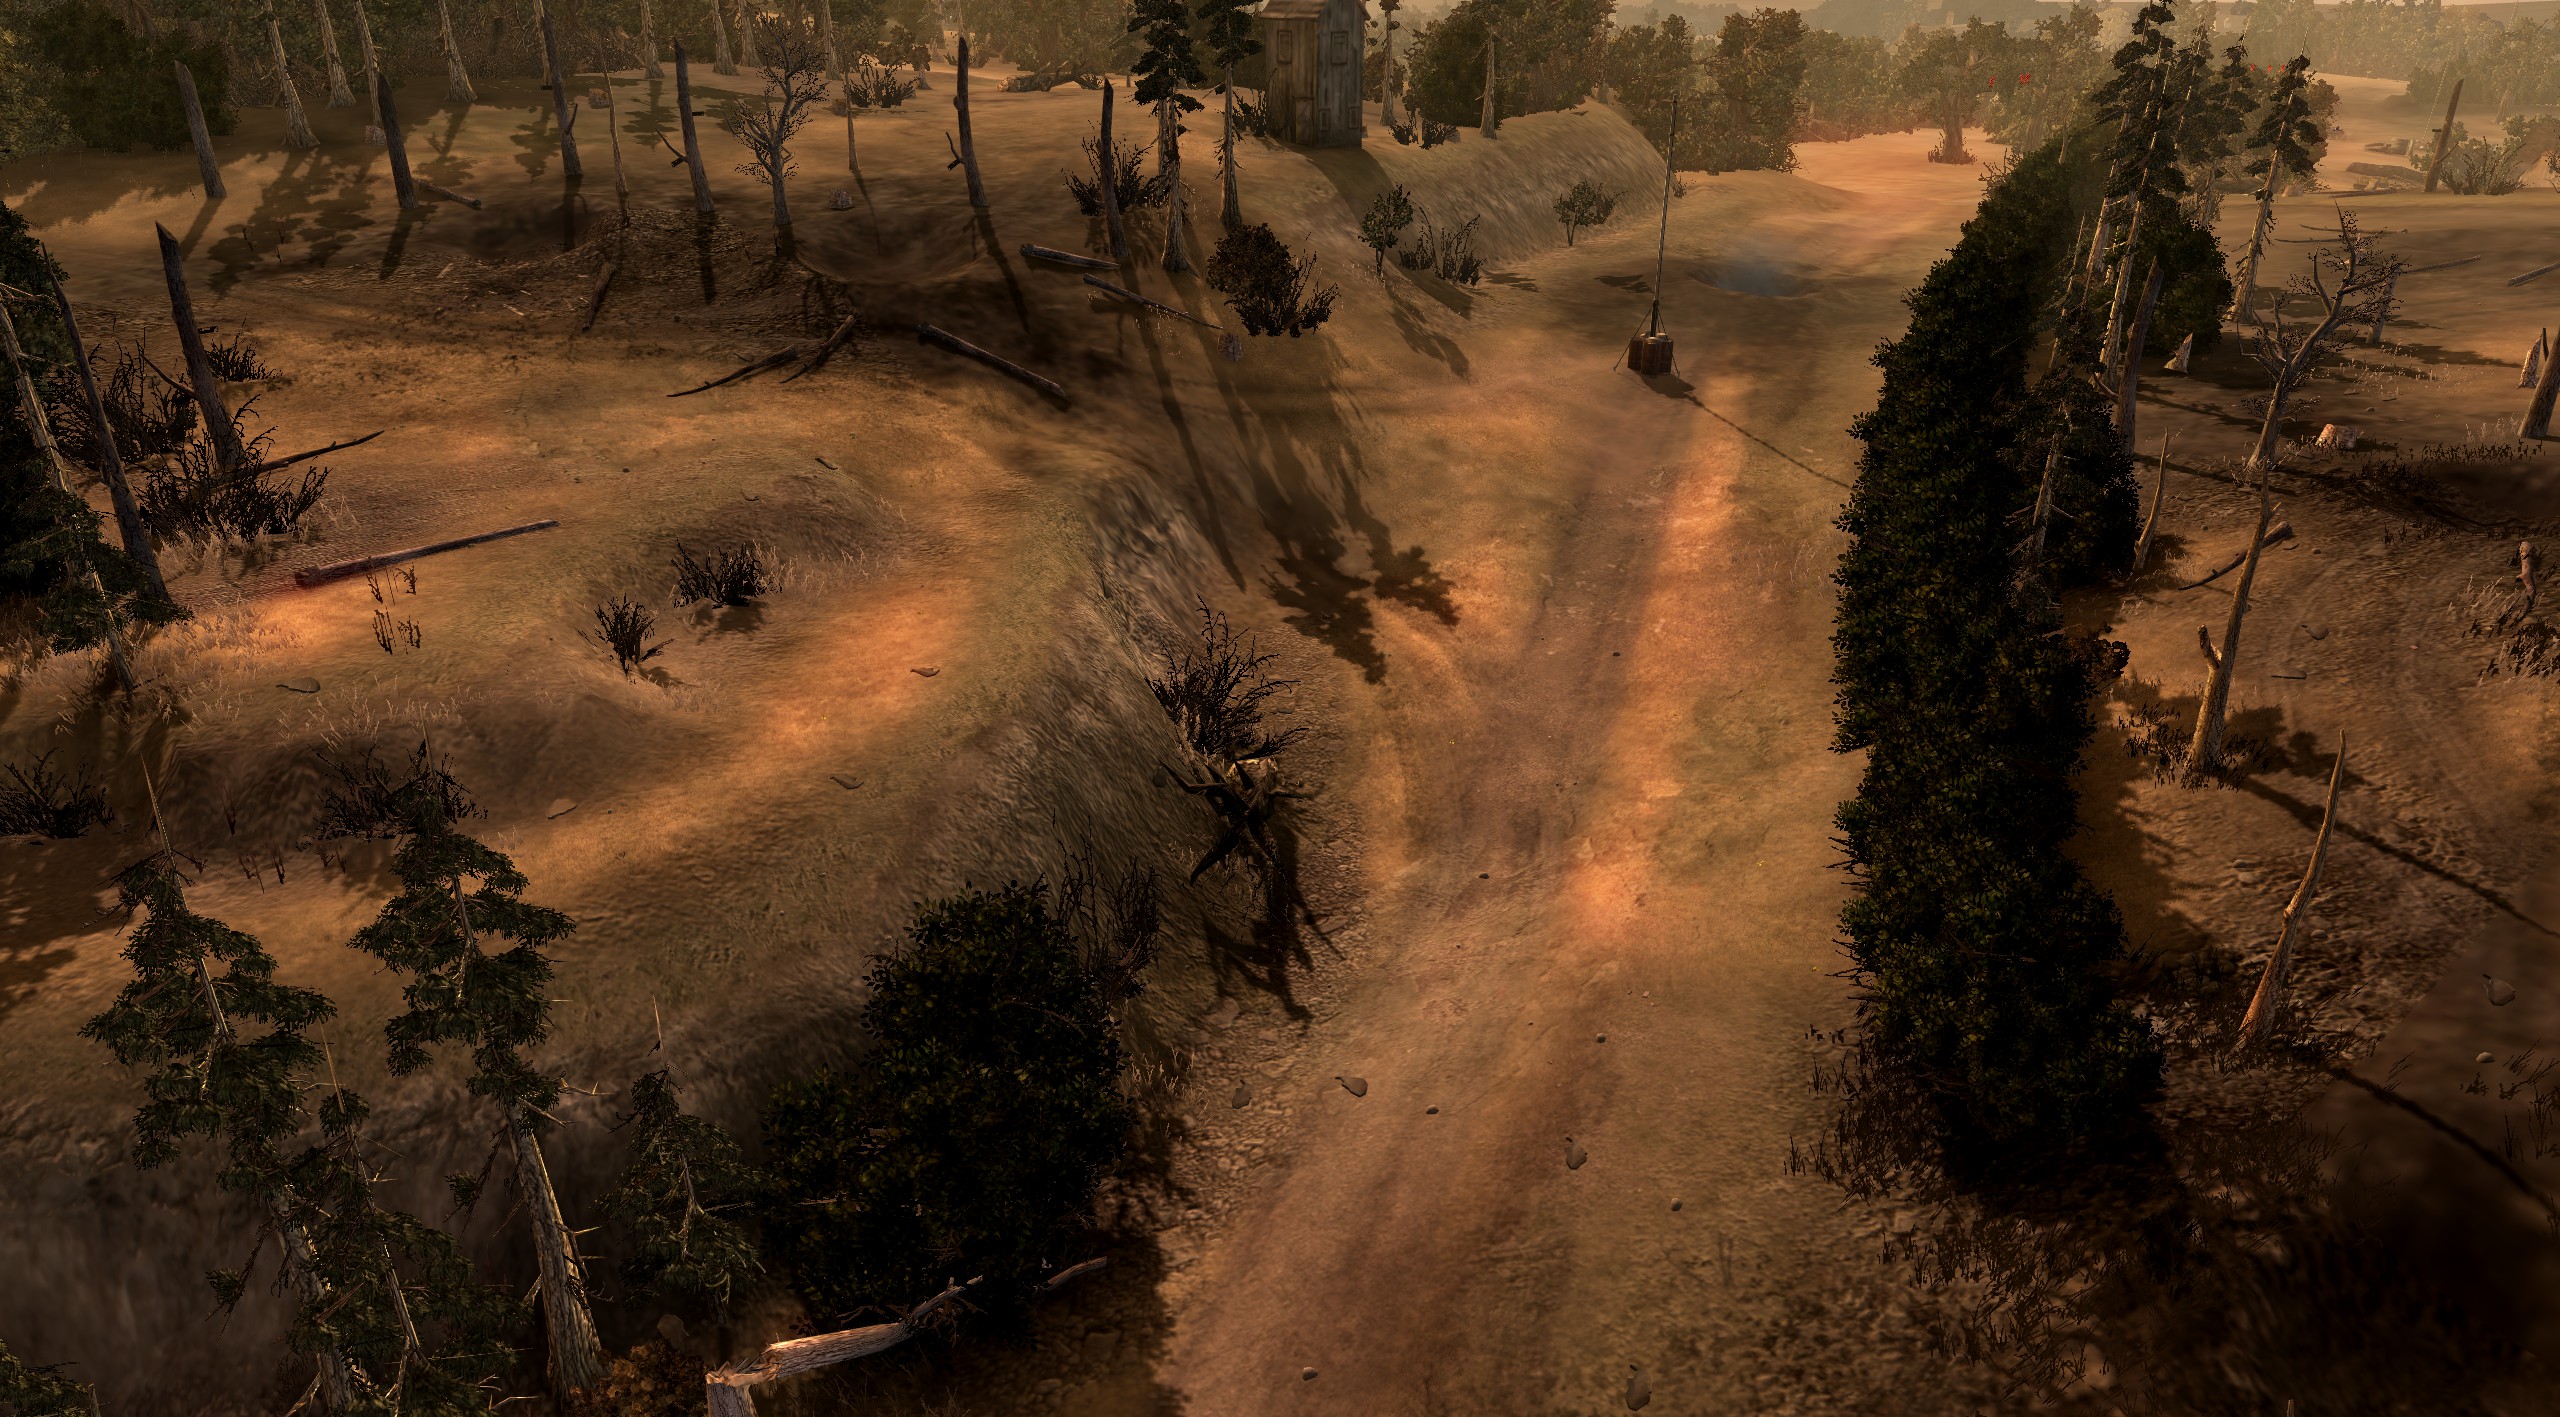 One of the roads that passes between the hills - you can block these off with mines and barbed wire, or use them as flanking routes or ways to attack the player bases without going over the hills.